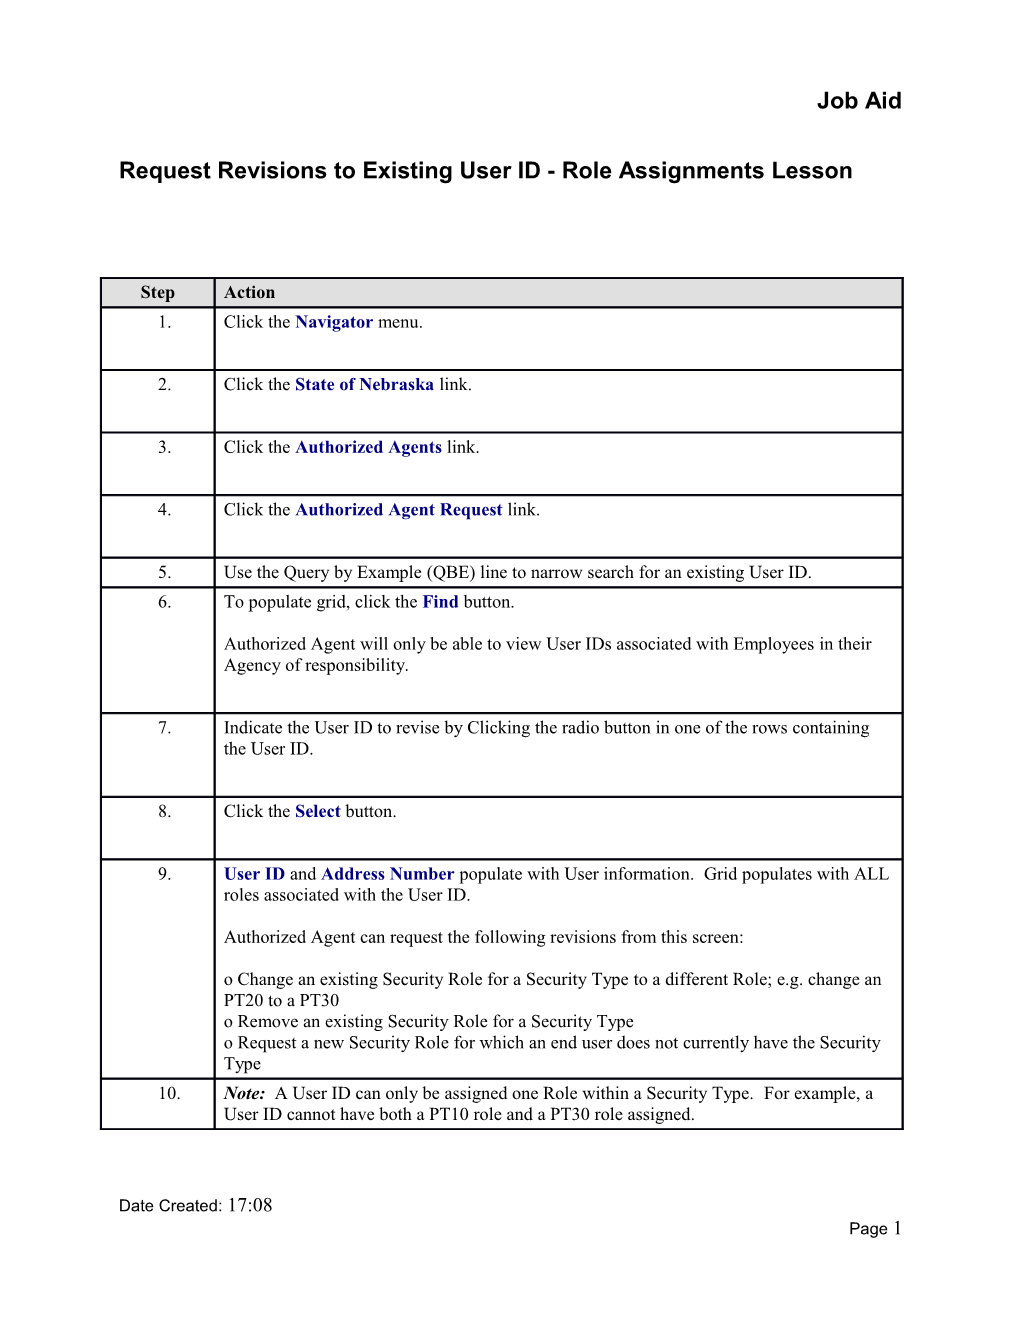 Request Revisions to Existing User ID - Role Assignments Lesson